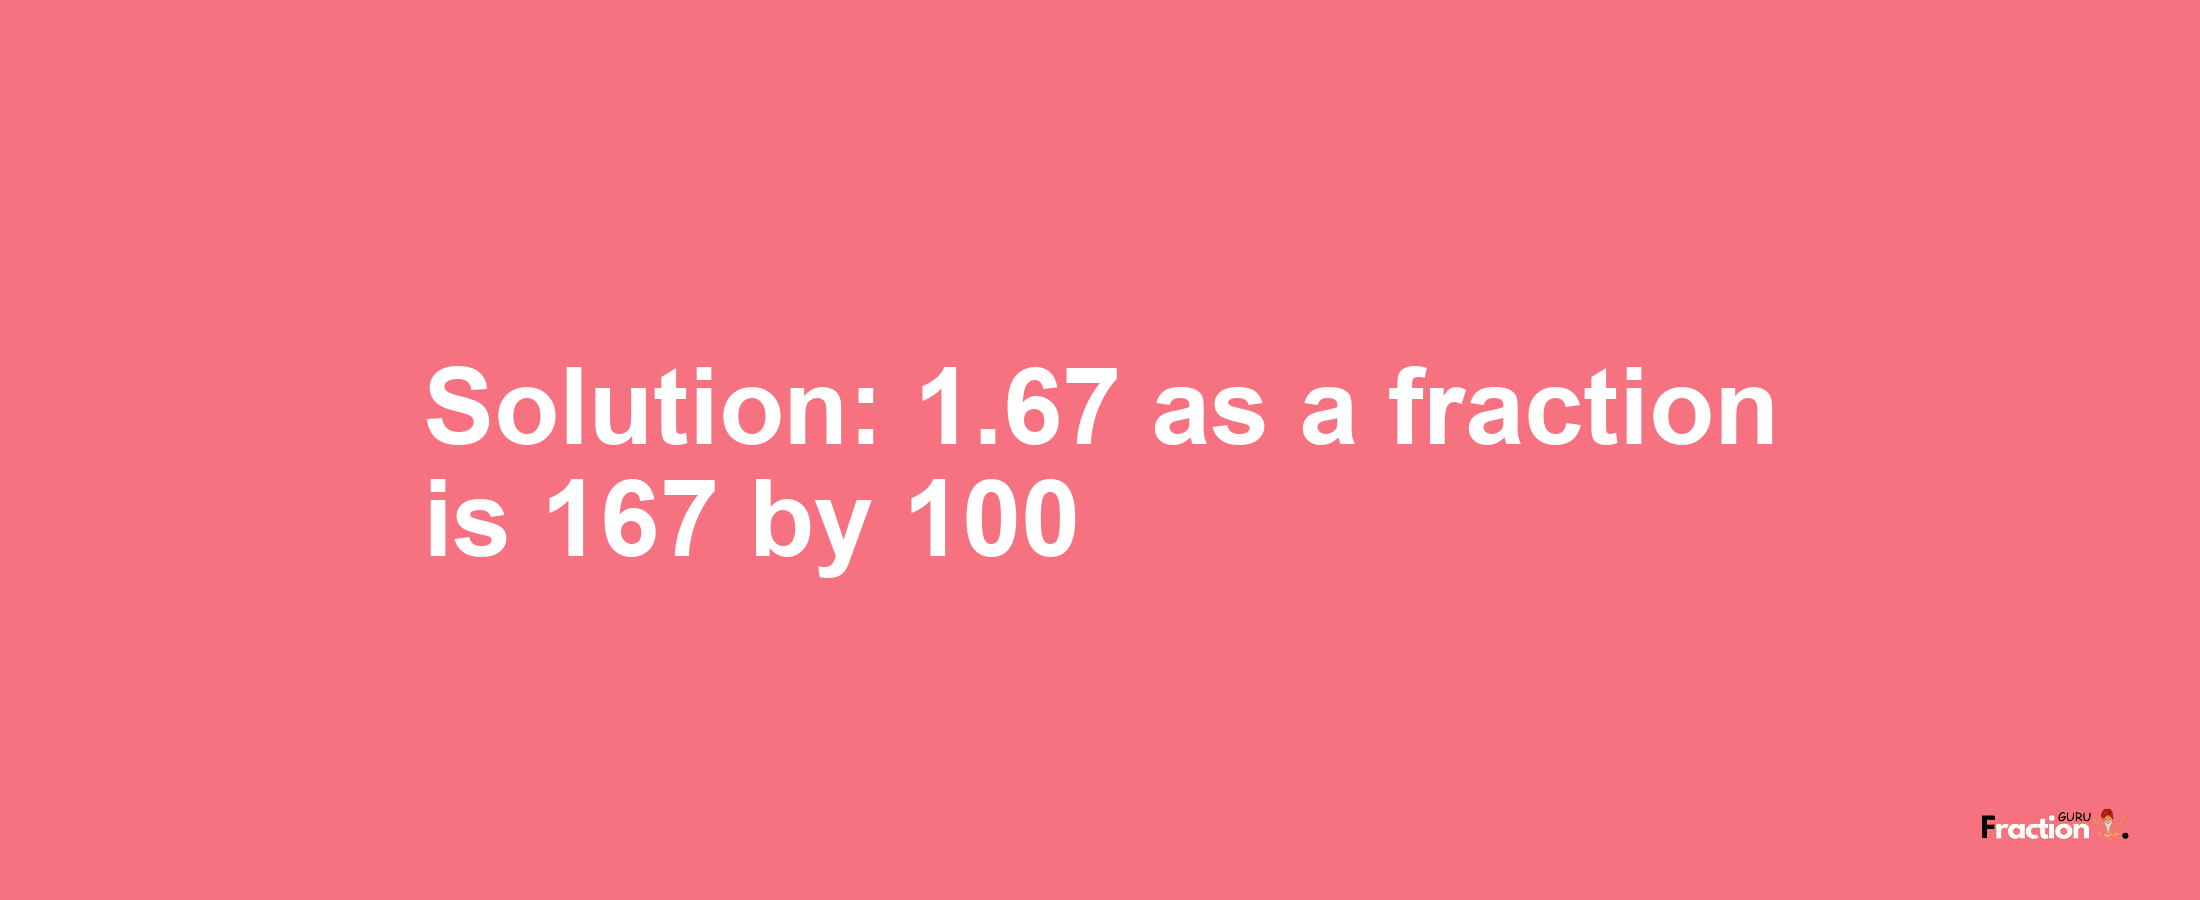 Solution:1.67 as a fraction is 167/100